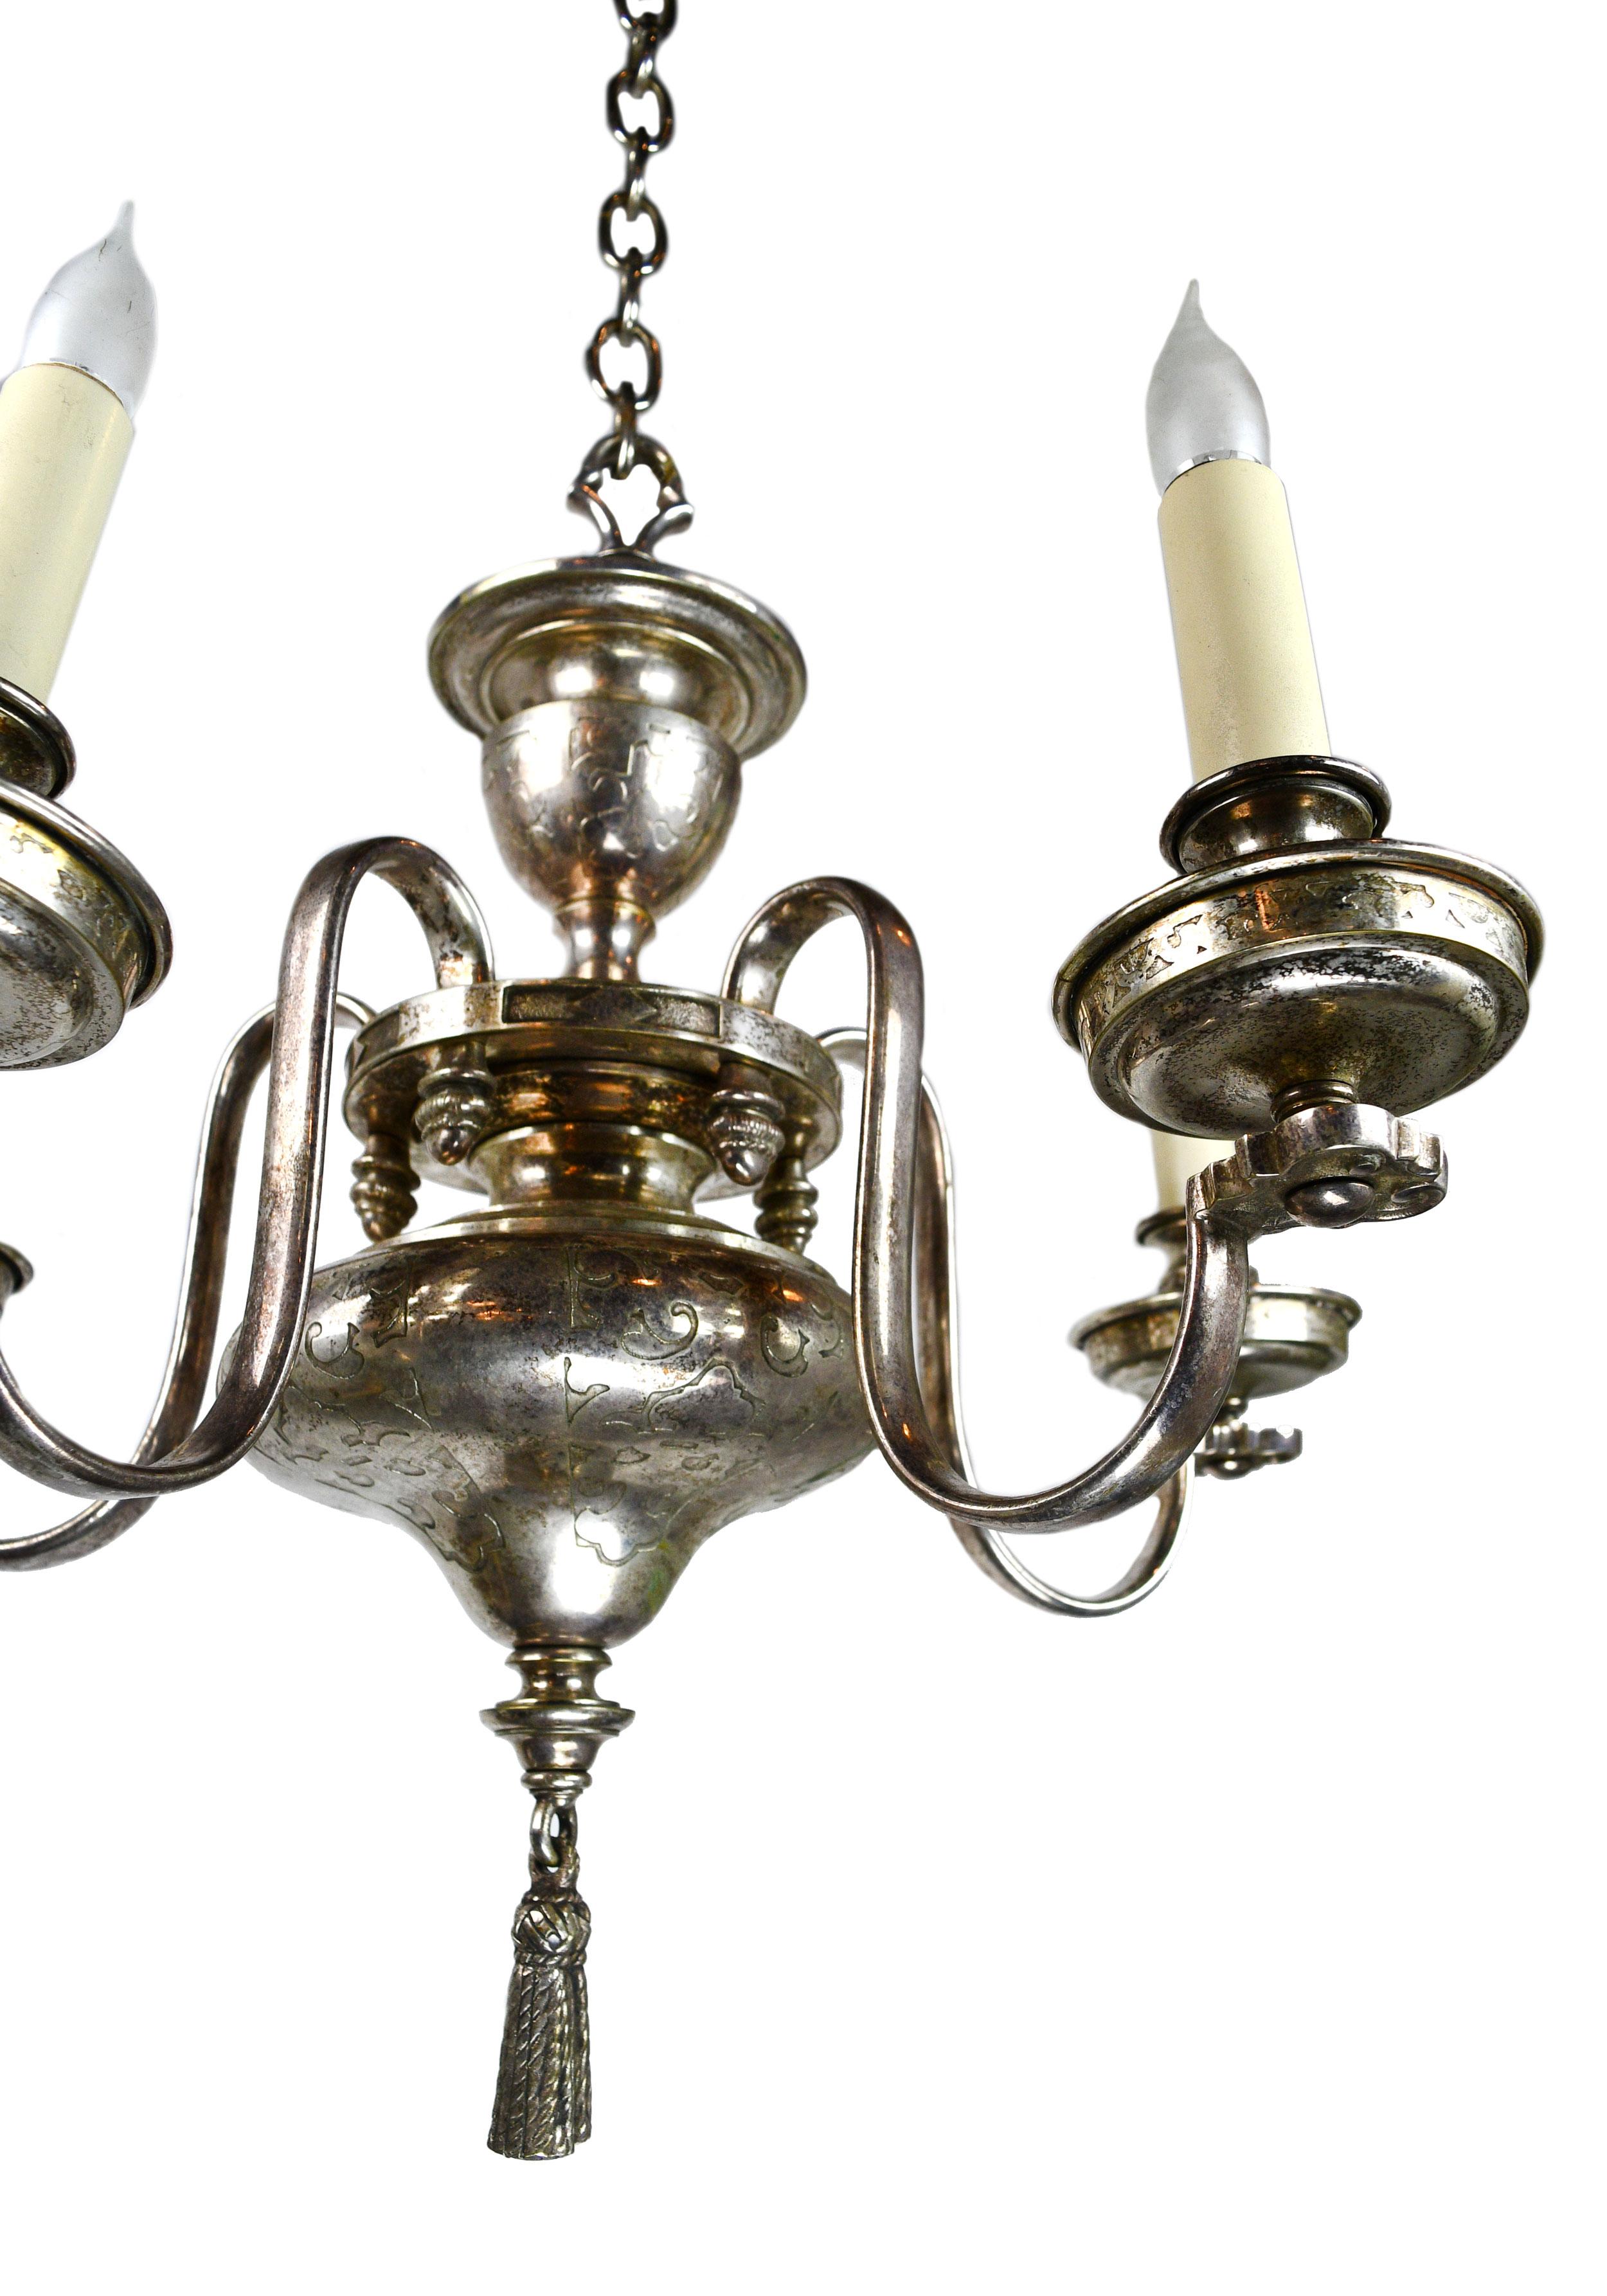 This stunning chandelier has etchings within the silver plating of the body and a lovely finial hanging below. The fine craftsmanship found through within the silver plating of this chandelier is truly eye-catching!